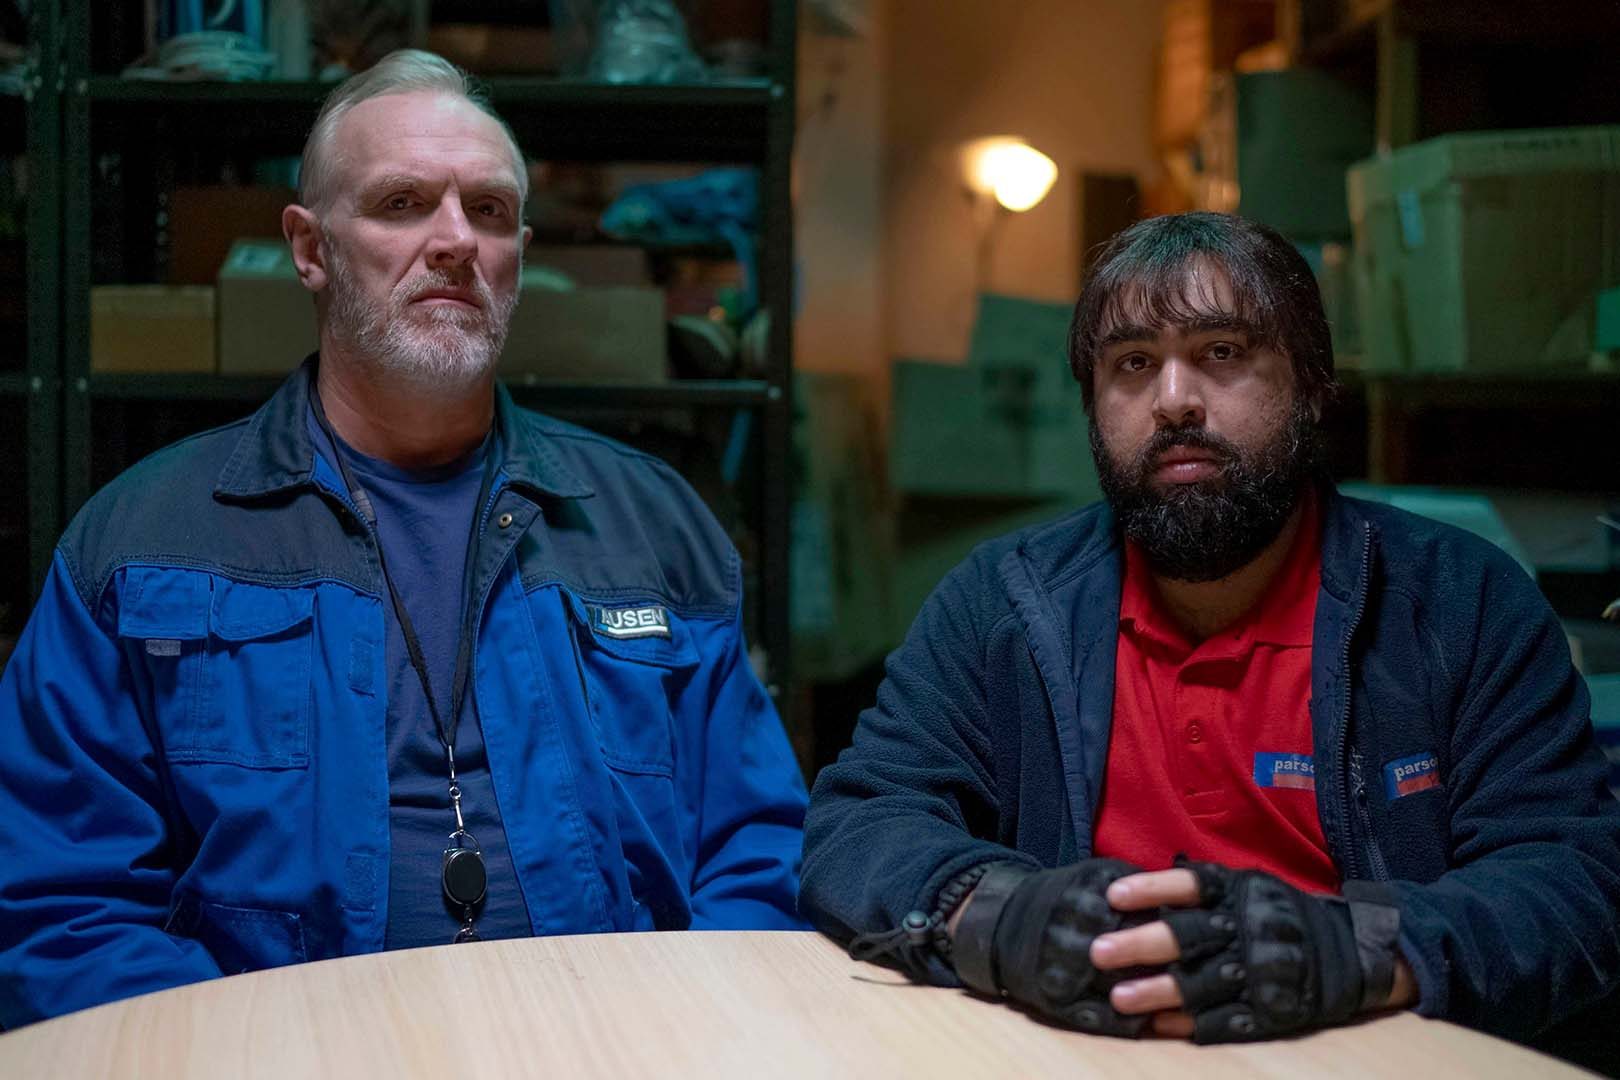 Greg Davies as Paul 'Wicky' Wickstead and Asim Chaudhry as Karl in 'The Cleaner' Season 2.